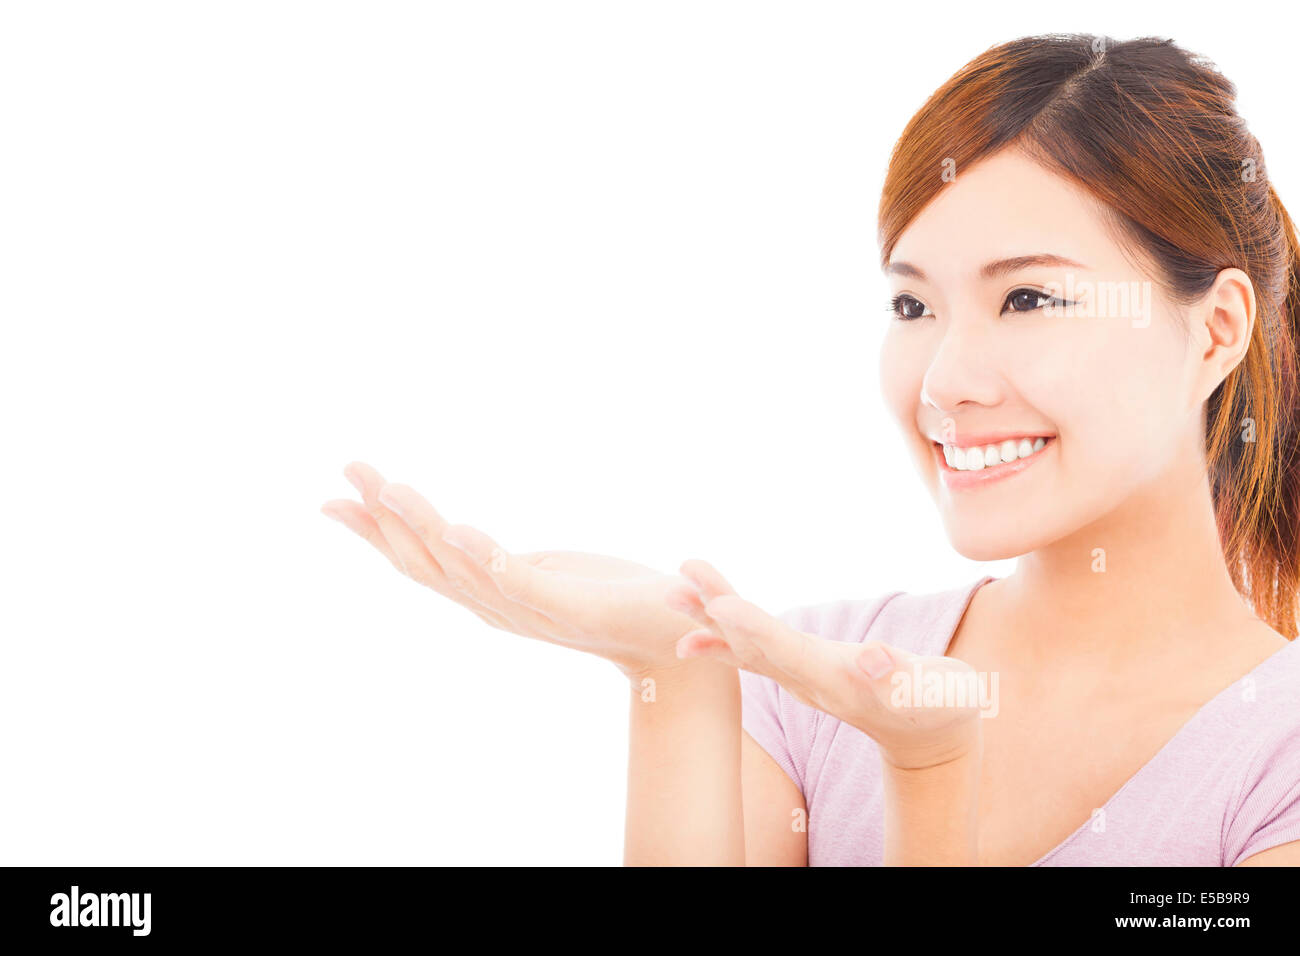 closeup of pretty woman looking the direction of hand gesture Stock Photo